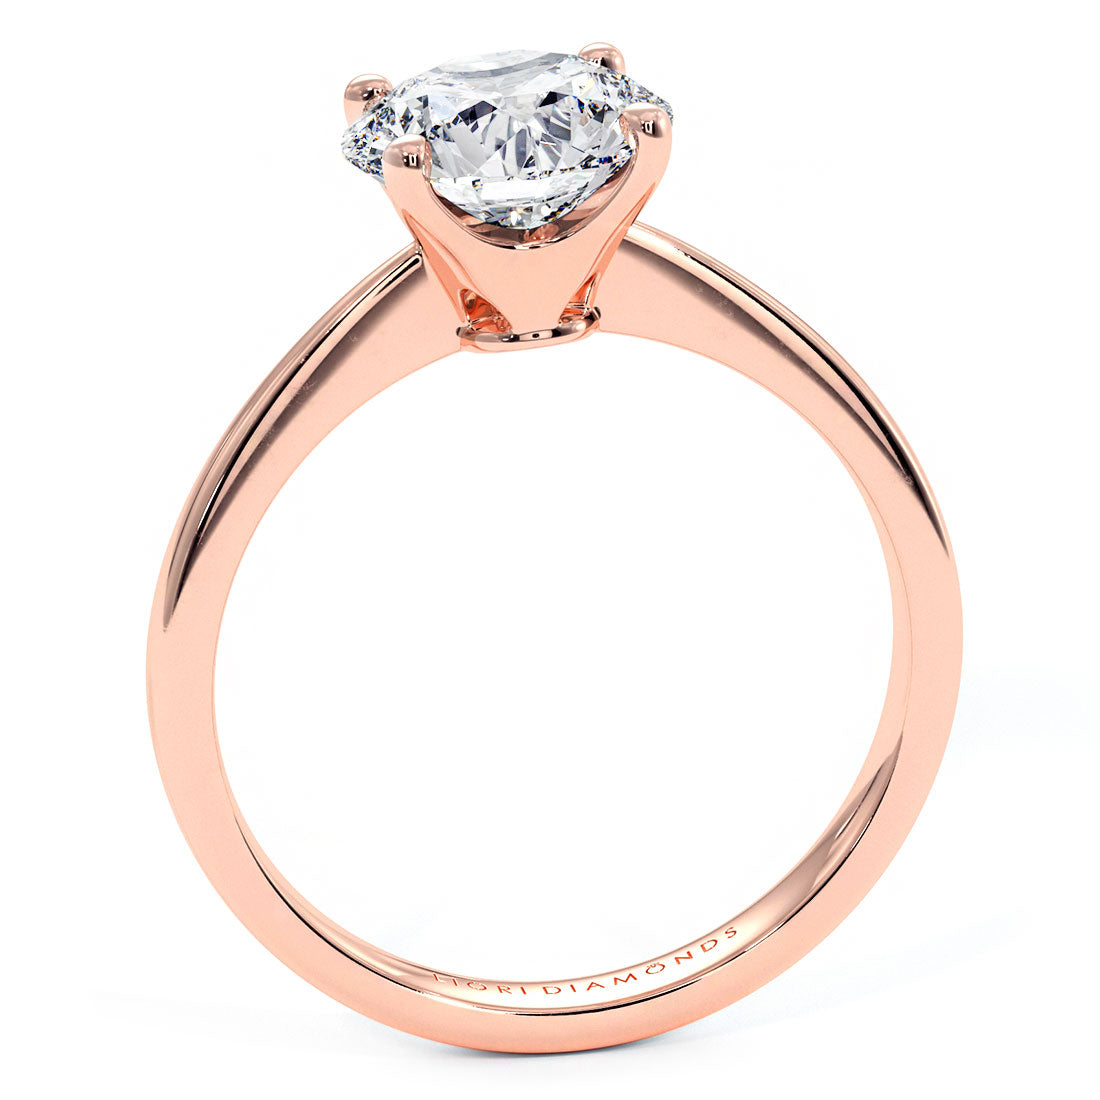 1.51ct GIA Certified D-VS1 Round Brilliant Petite Tapered 4 Prong Solitaire Lab Grown Diamond Engagement Ring set in 14k Rose Gold